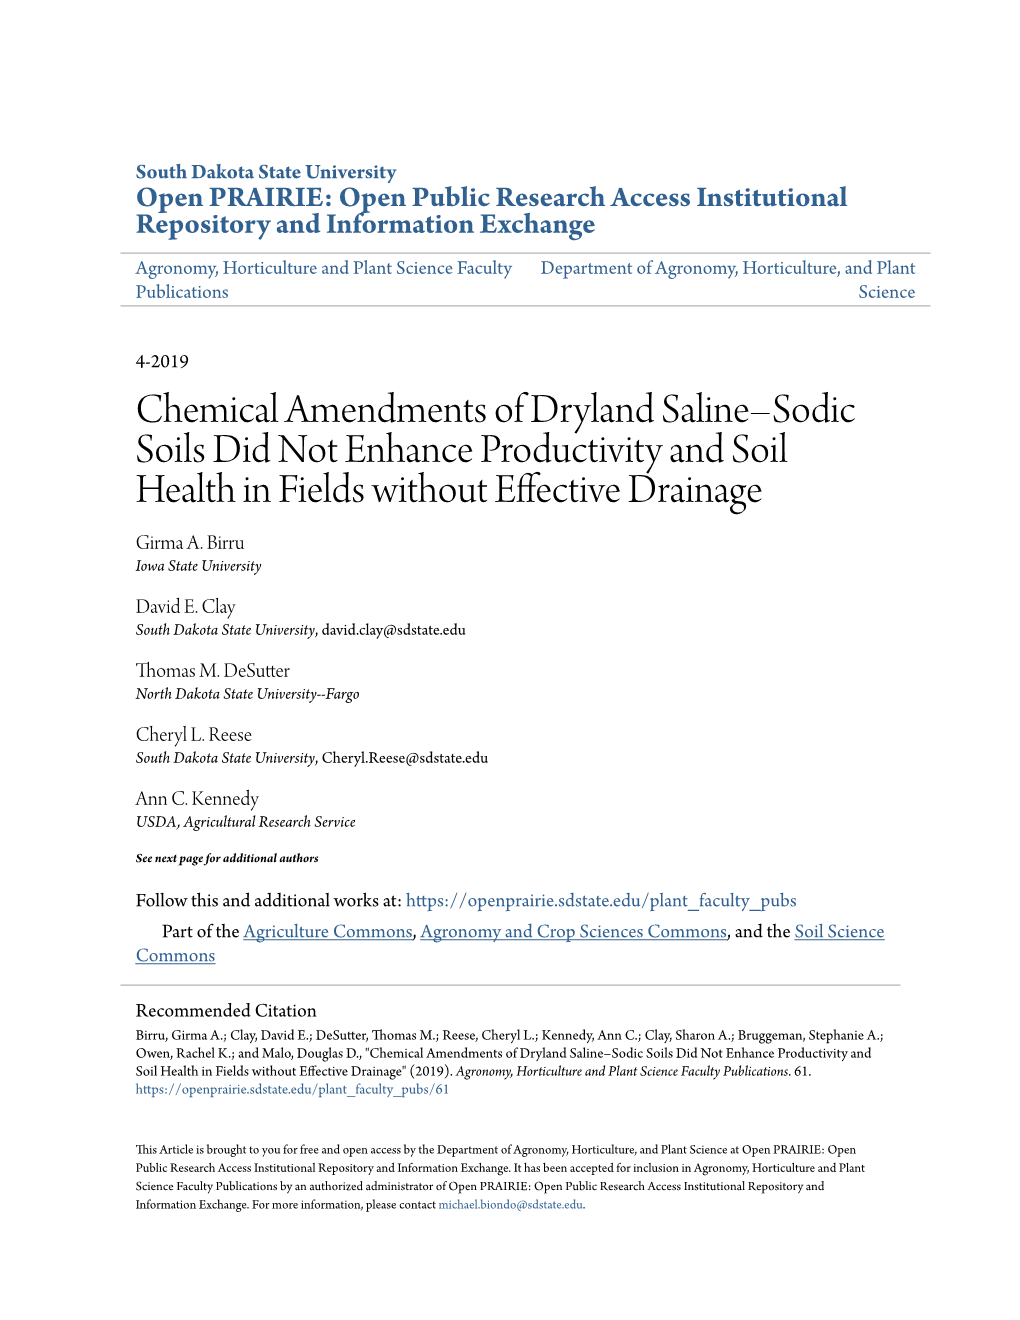 Chemical Amendments of Dryland Saline–Sodic Soils Did Not Enhance Productivity and Soil Health in Fields Without Effective Drainage Girma A